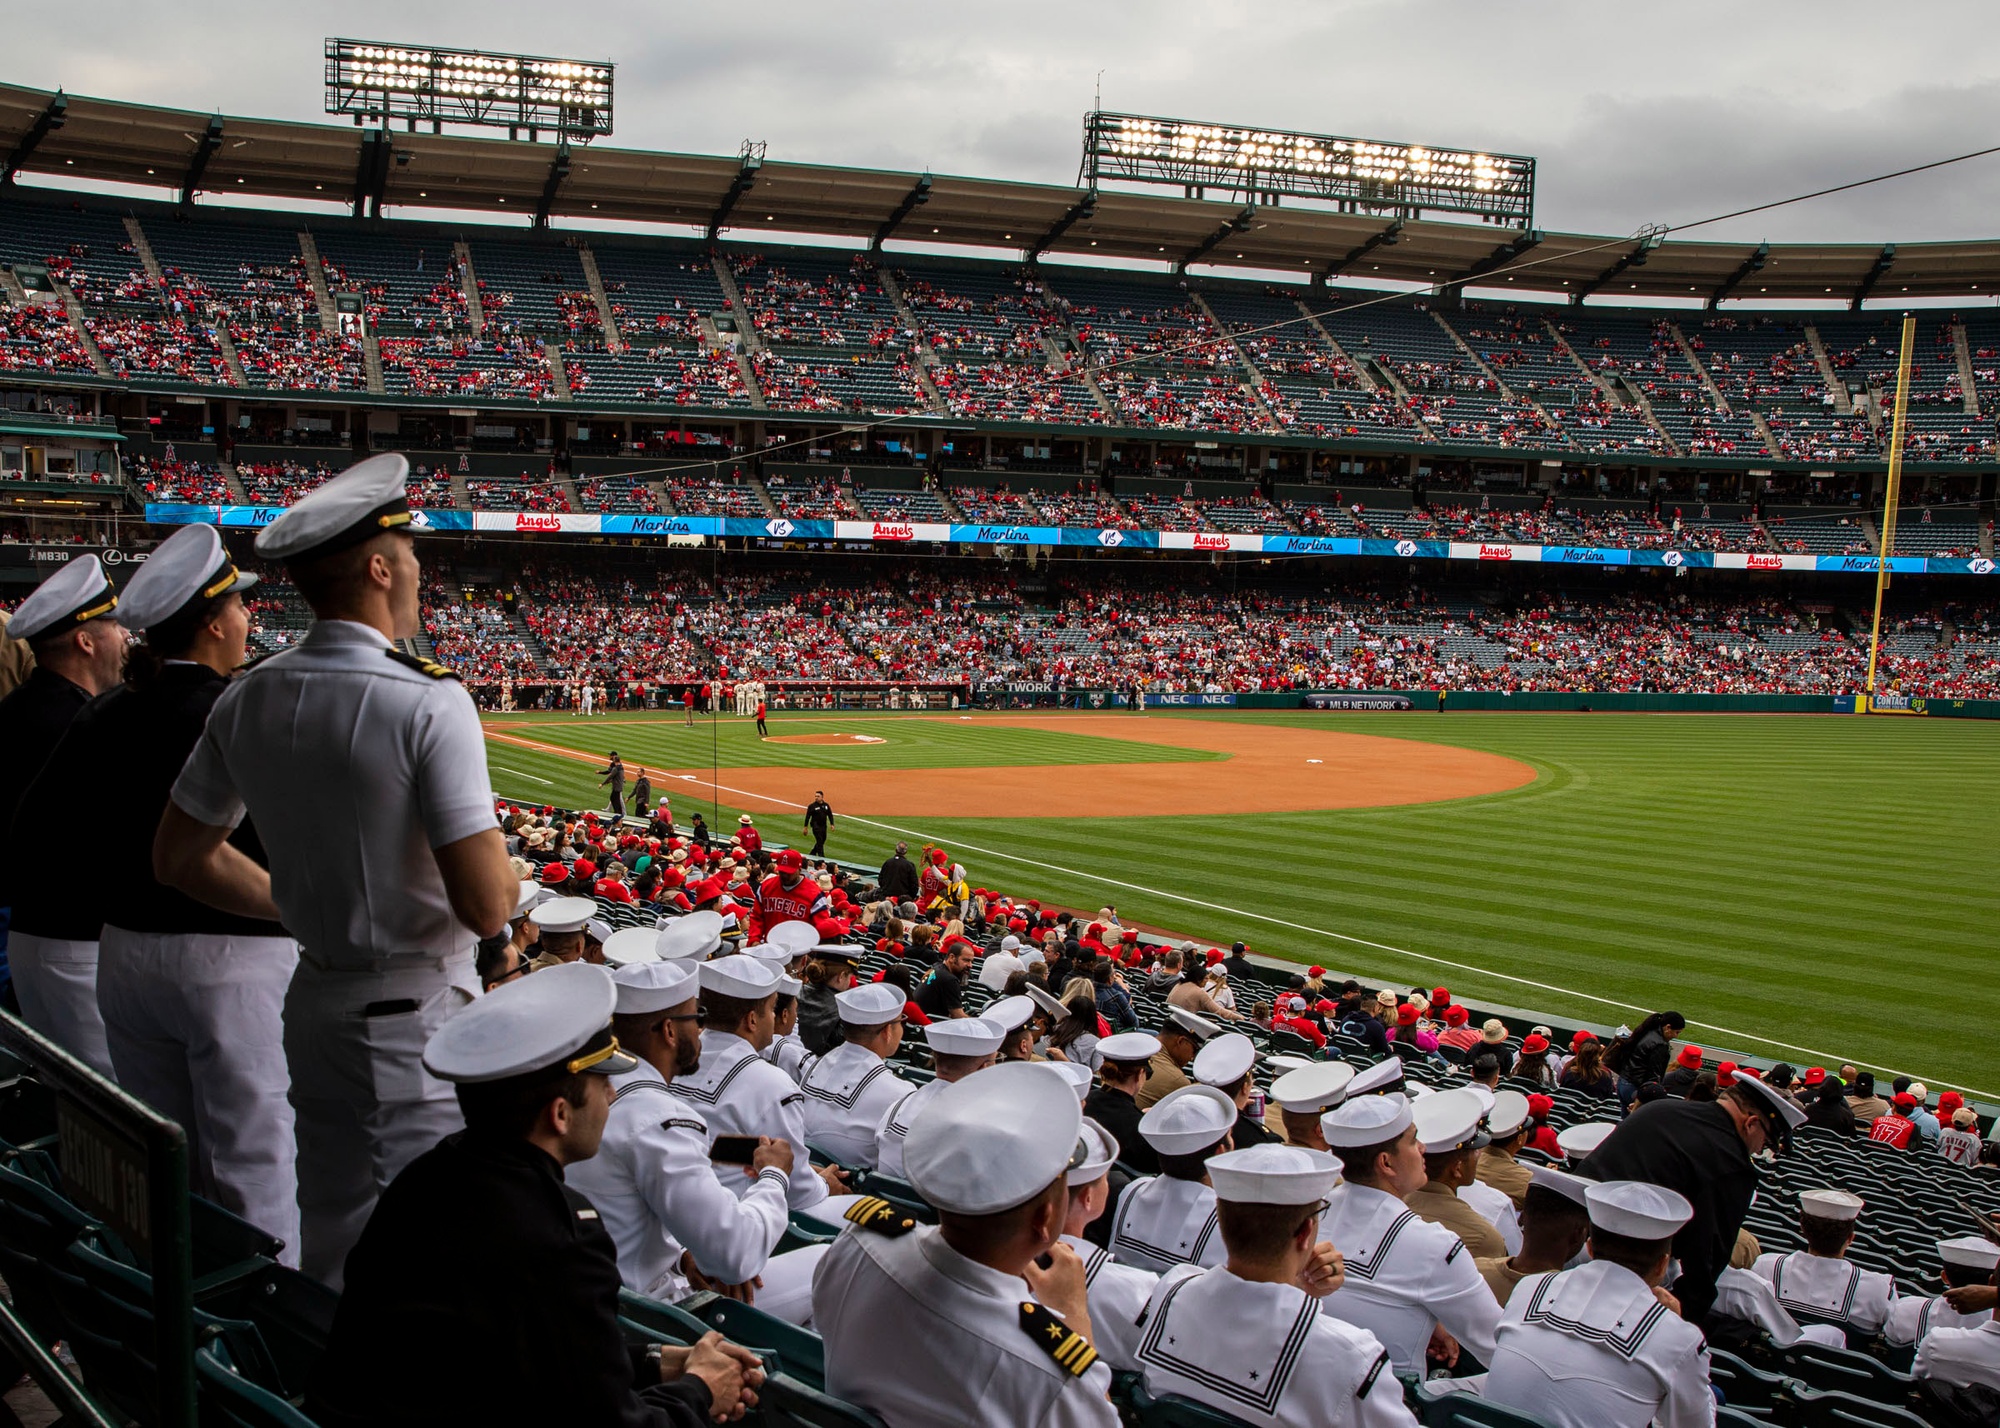 DVIDS - Images - Sailors and Marine attend a Anaheim Angels game